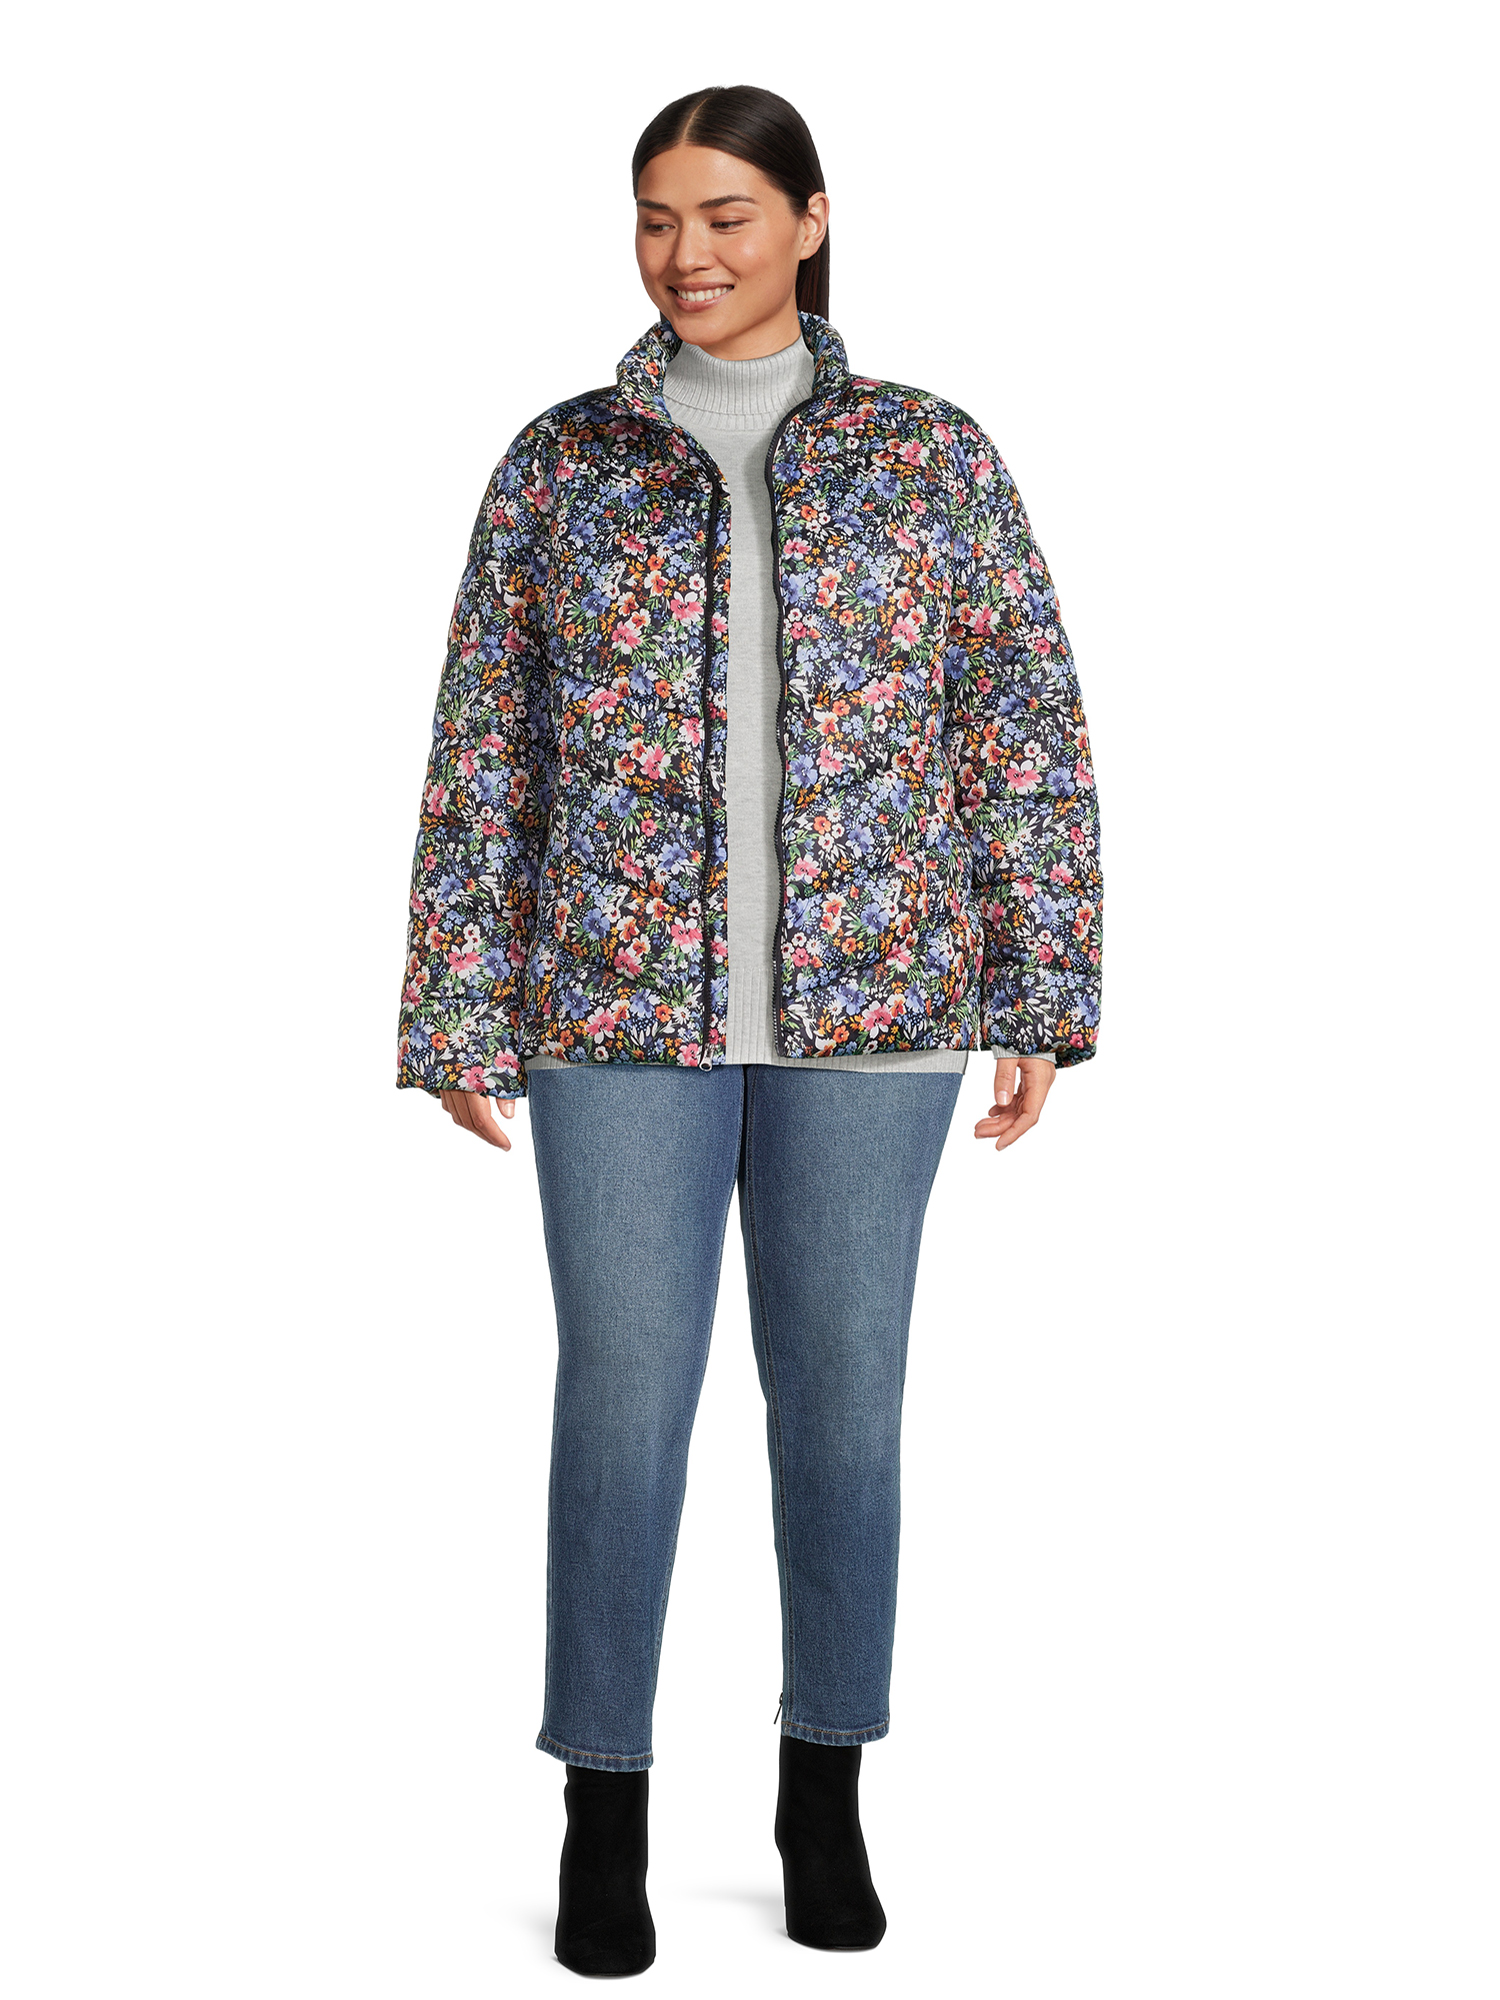 Time and Tru Women's Plus Chevron Midweight Puffer Jacket, Sizes XS-3X - image 5 of 8